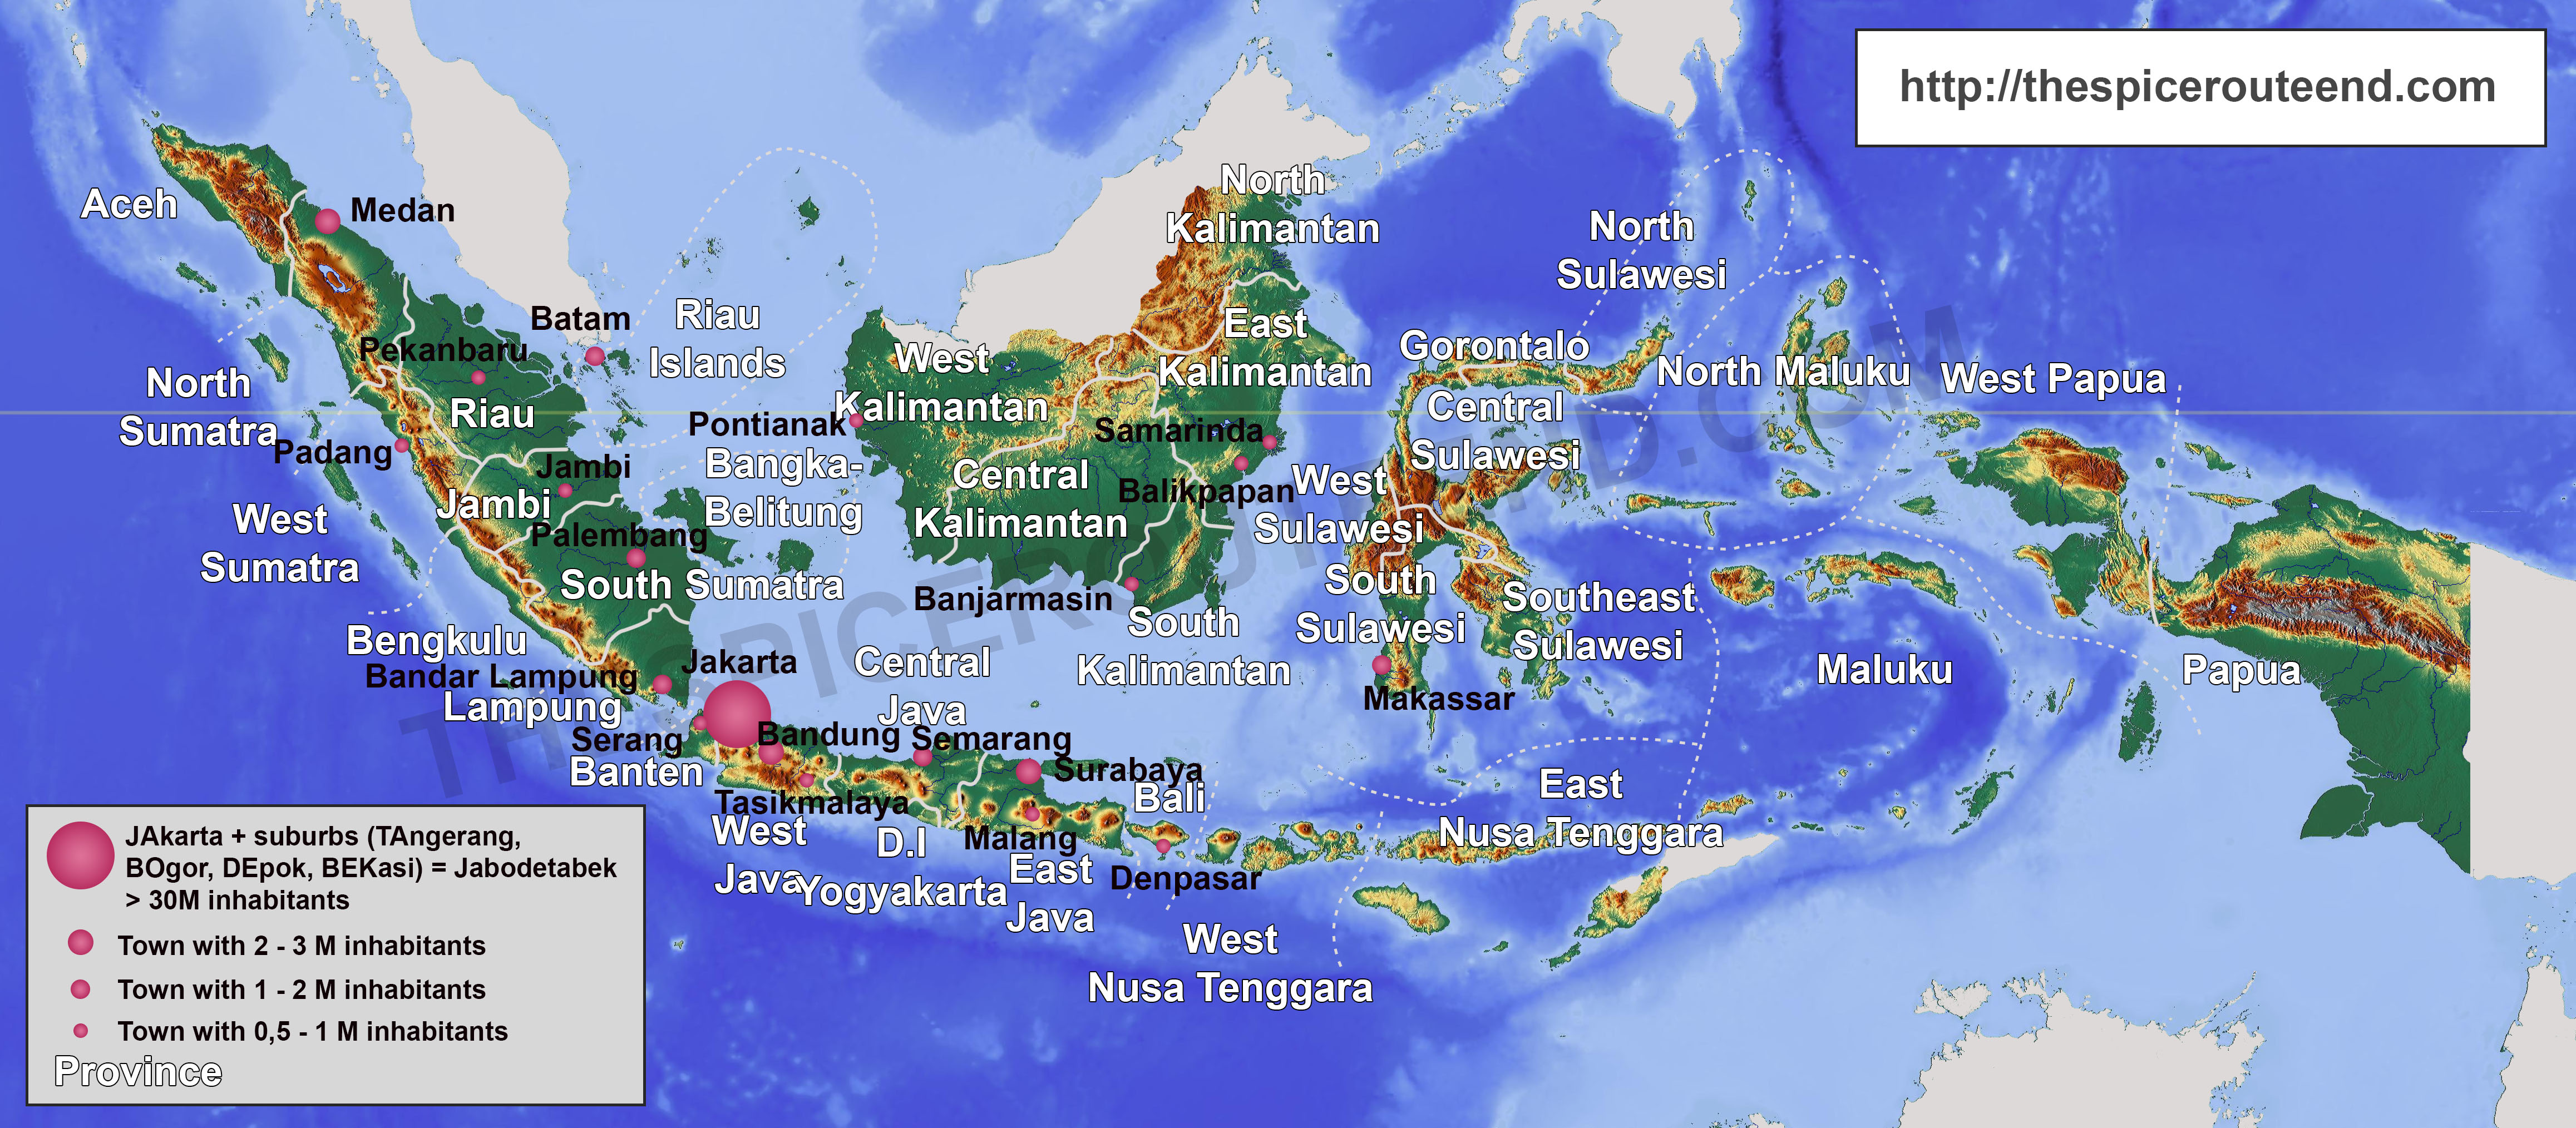 Indonesia provinces and main towns